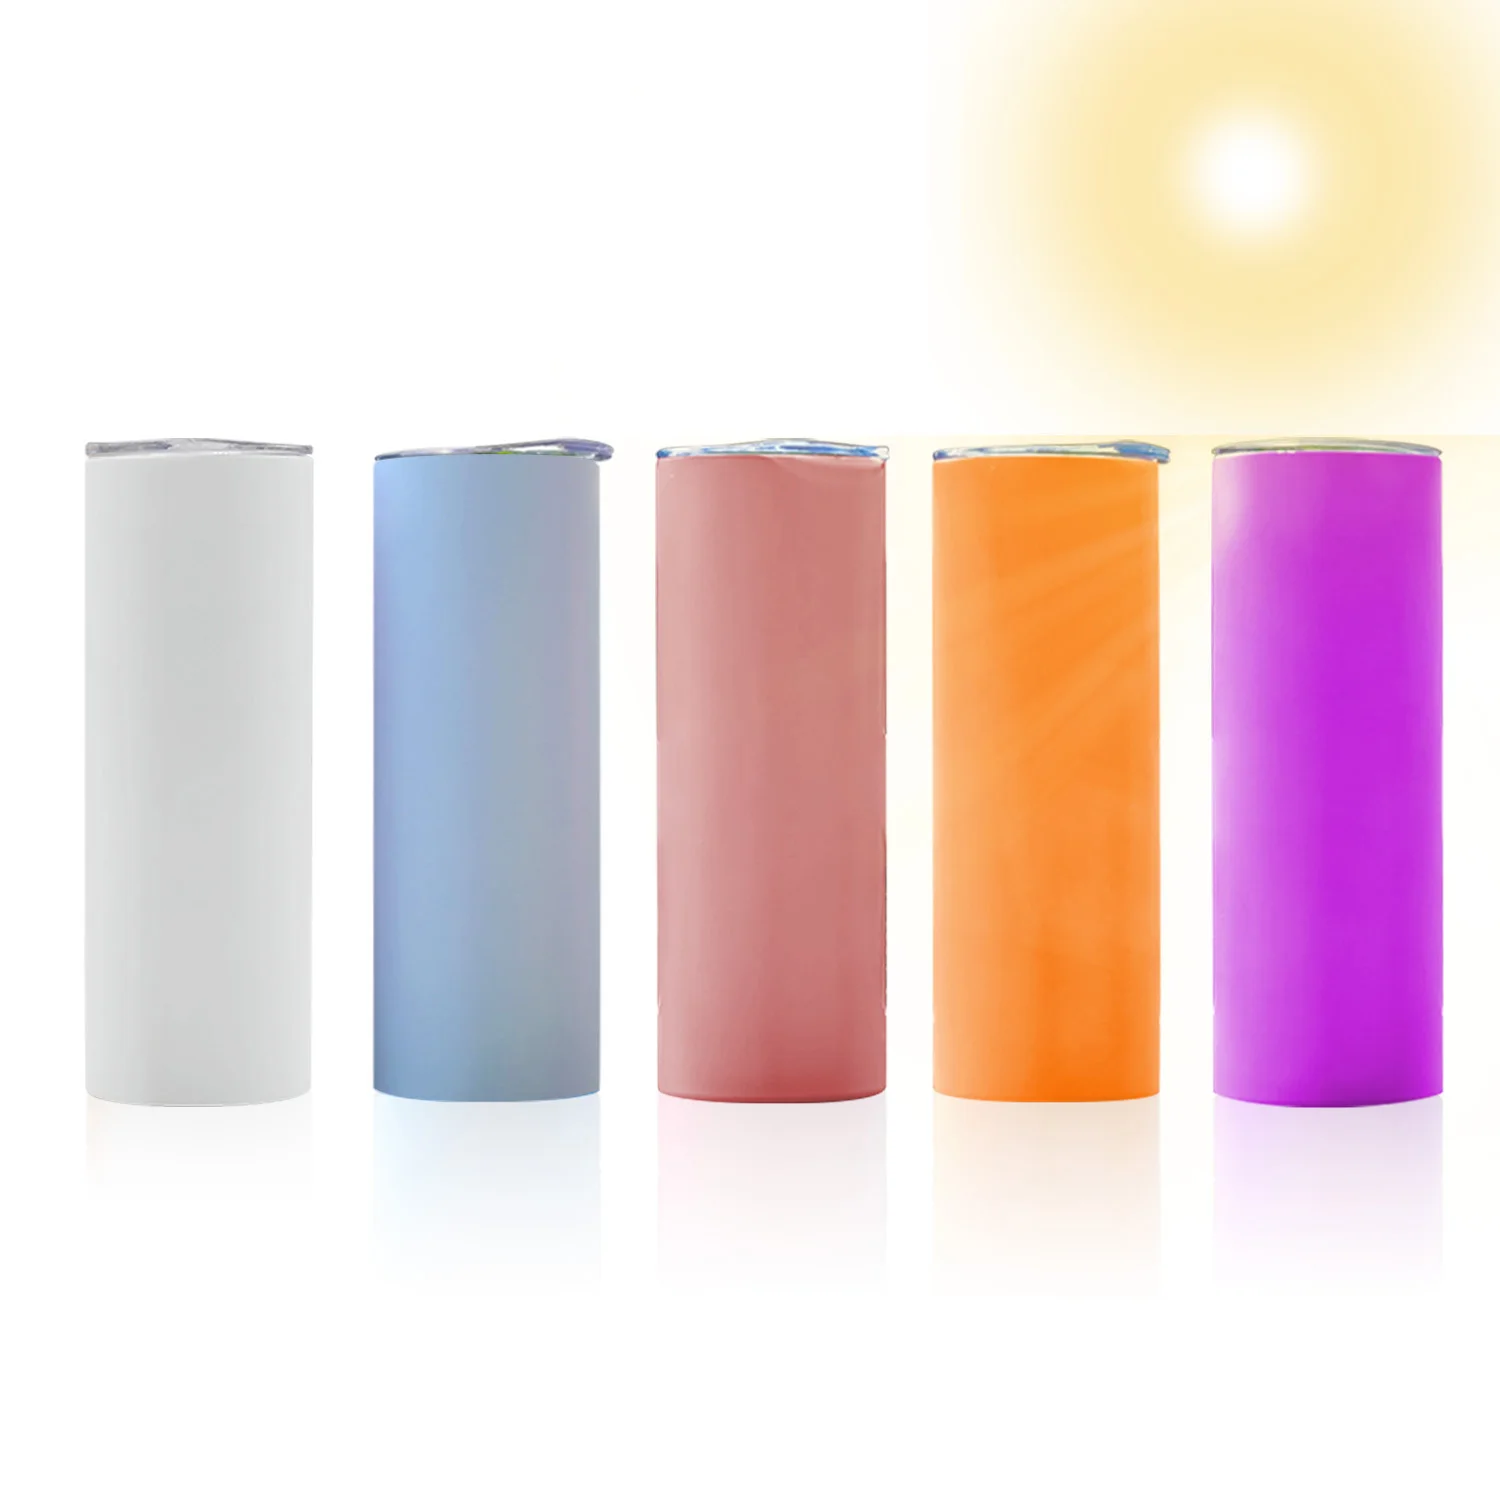 

USA warehouse mixed color double wall stainless steel travel mug 20oz glow orange pink blue purple uv sublimation tumbler, Customized colors acceptable